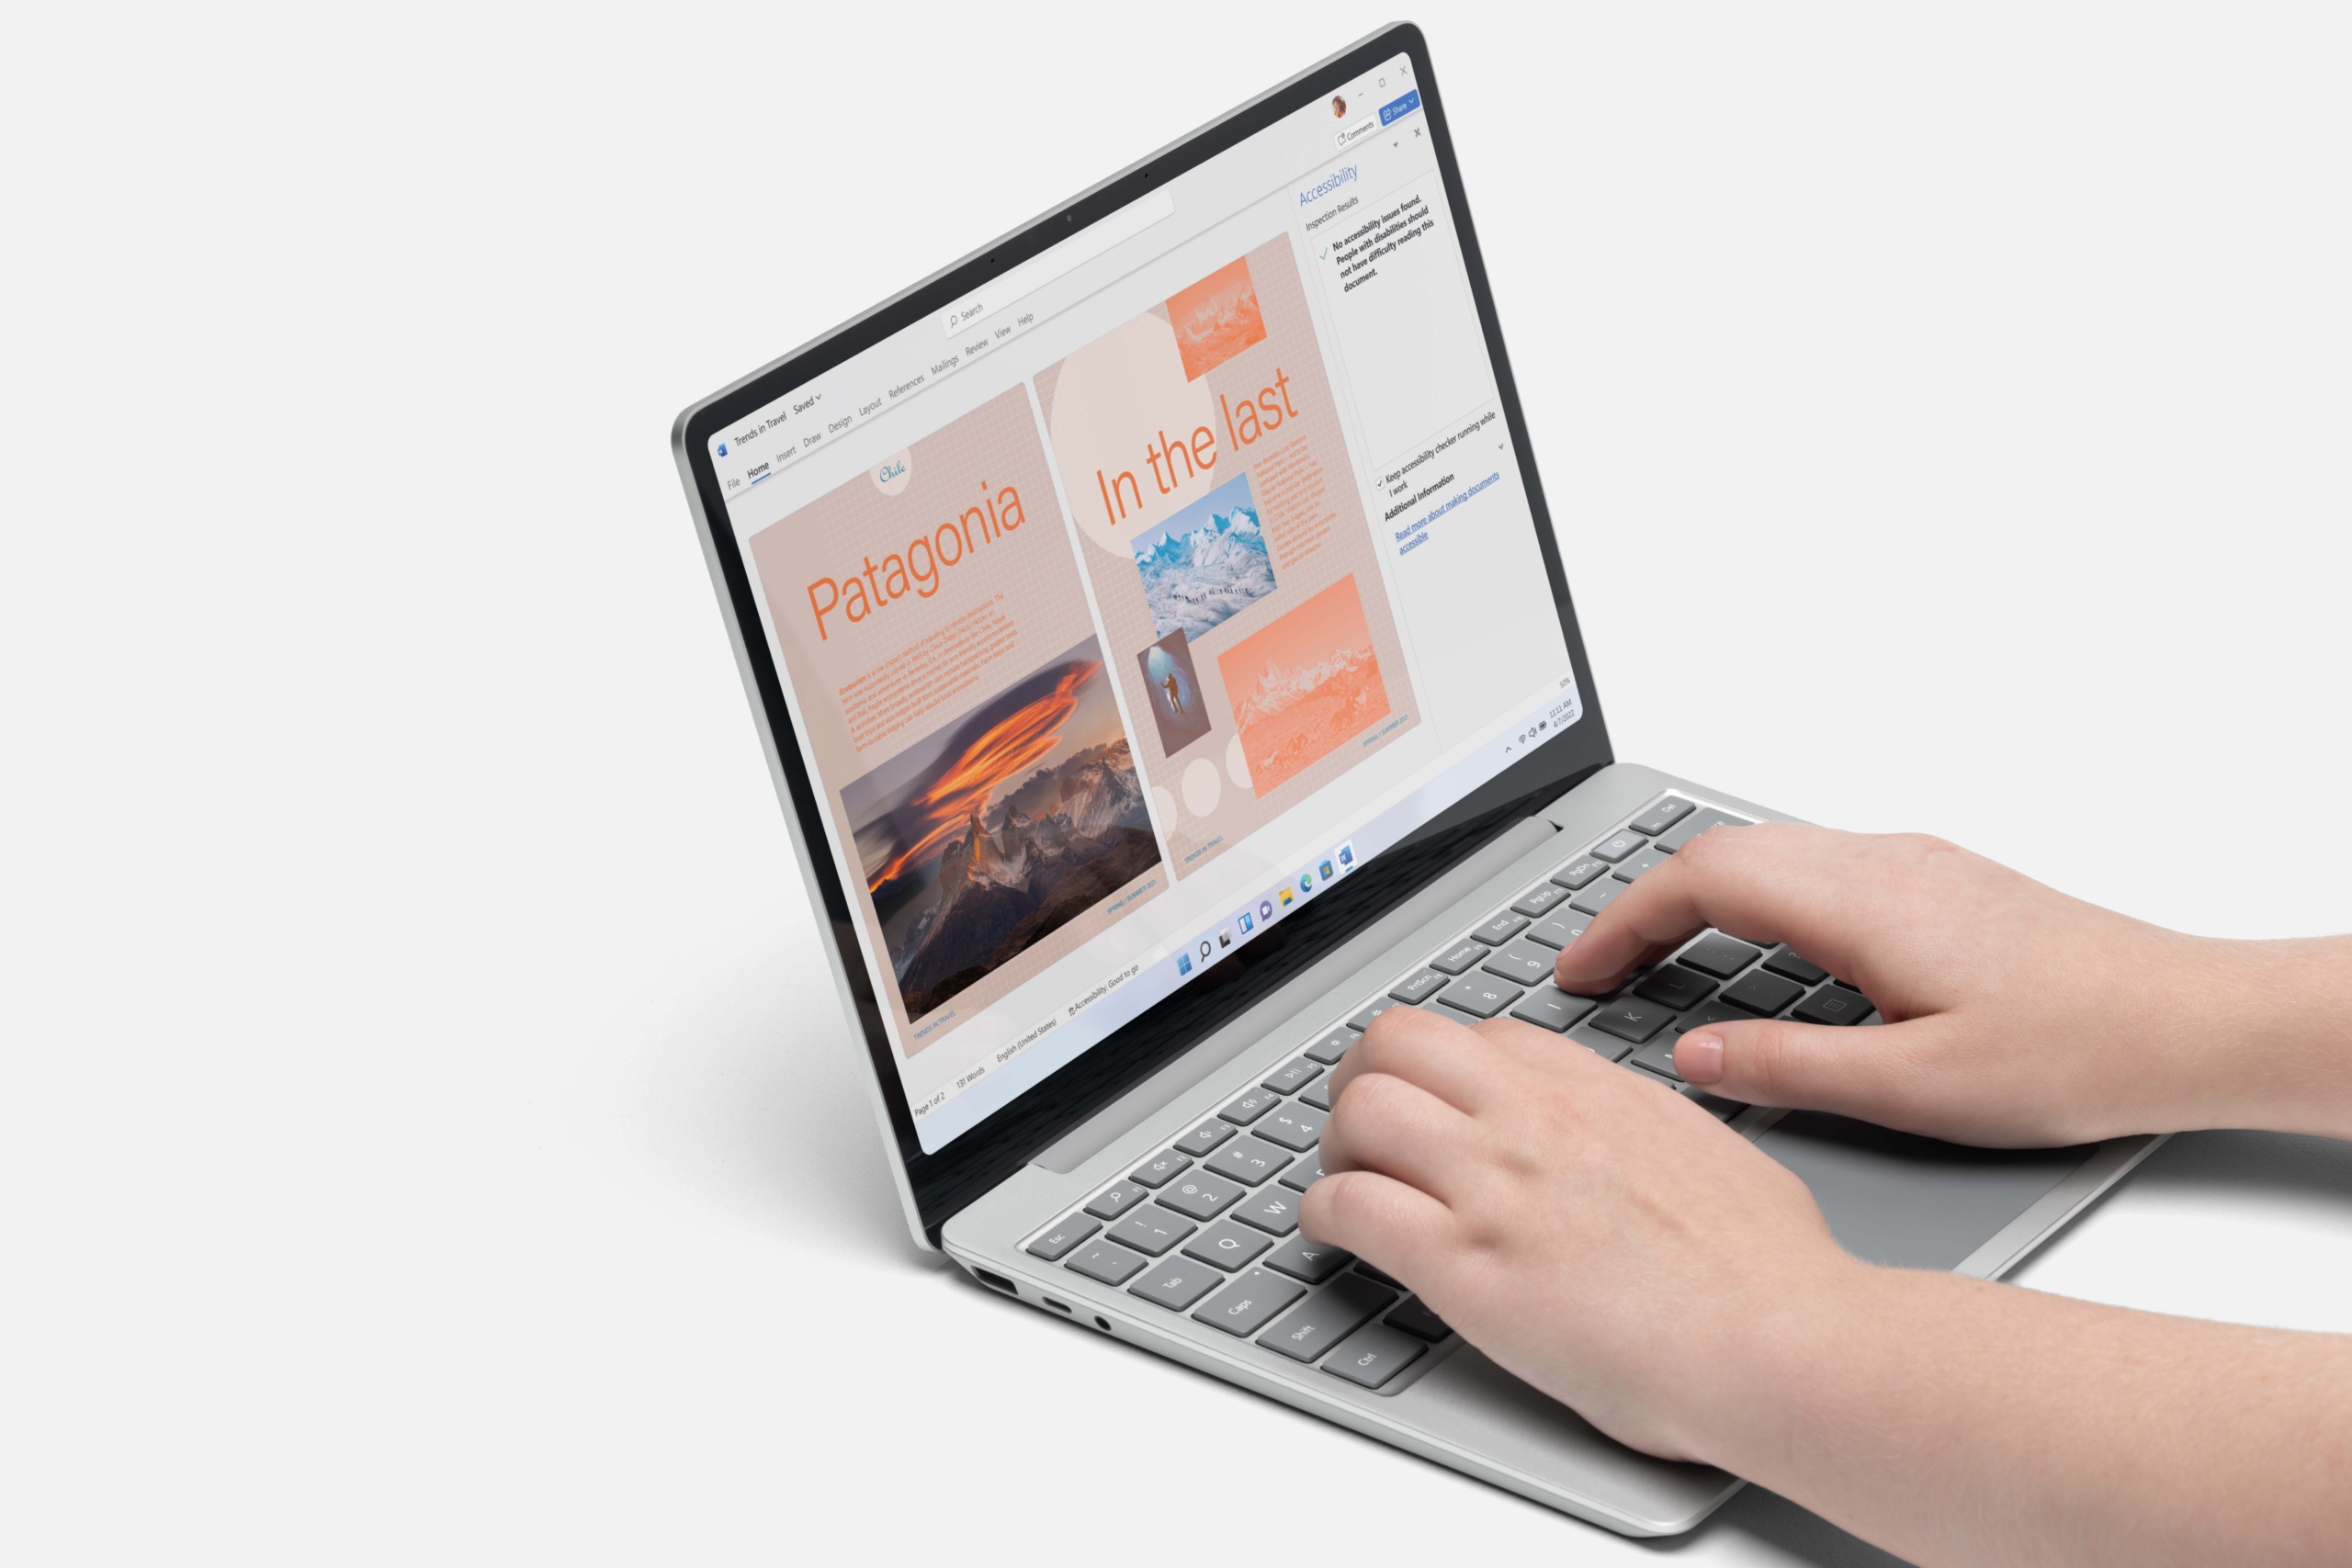 Microsoft Surface Laptop Go 2 Gets an 11th Generation Intel Processor, Up to 13.5 Hours of Battery Life, and Starts at $600